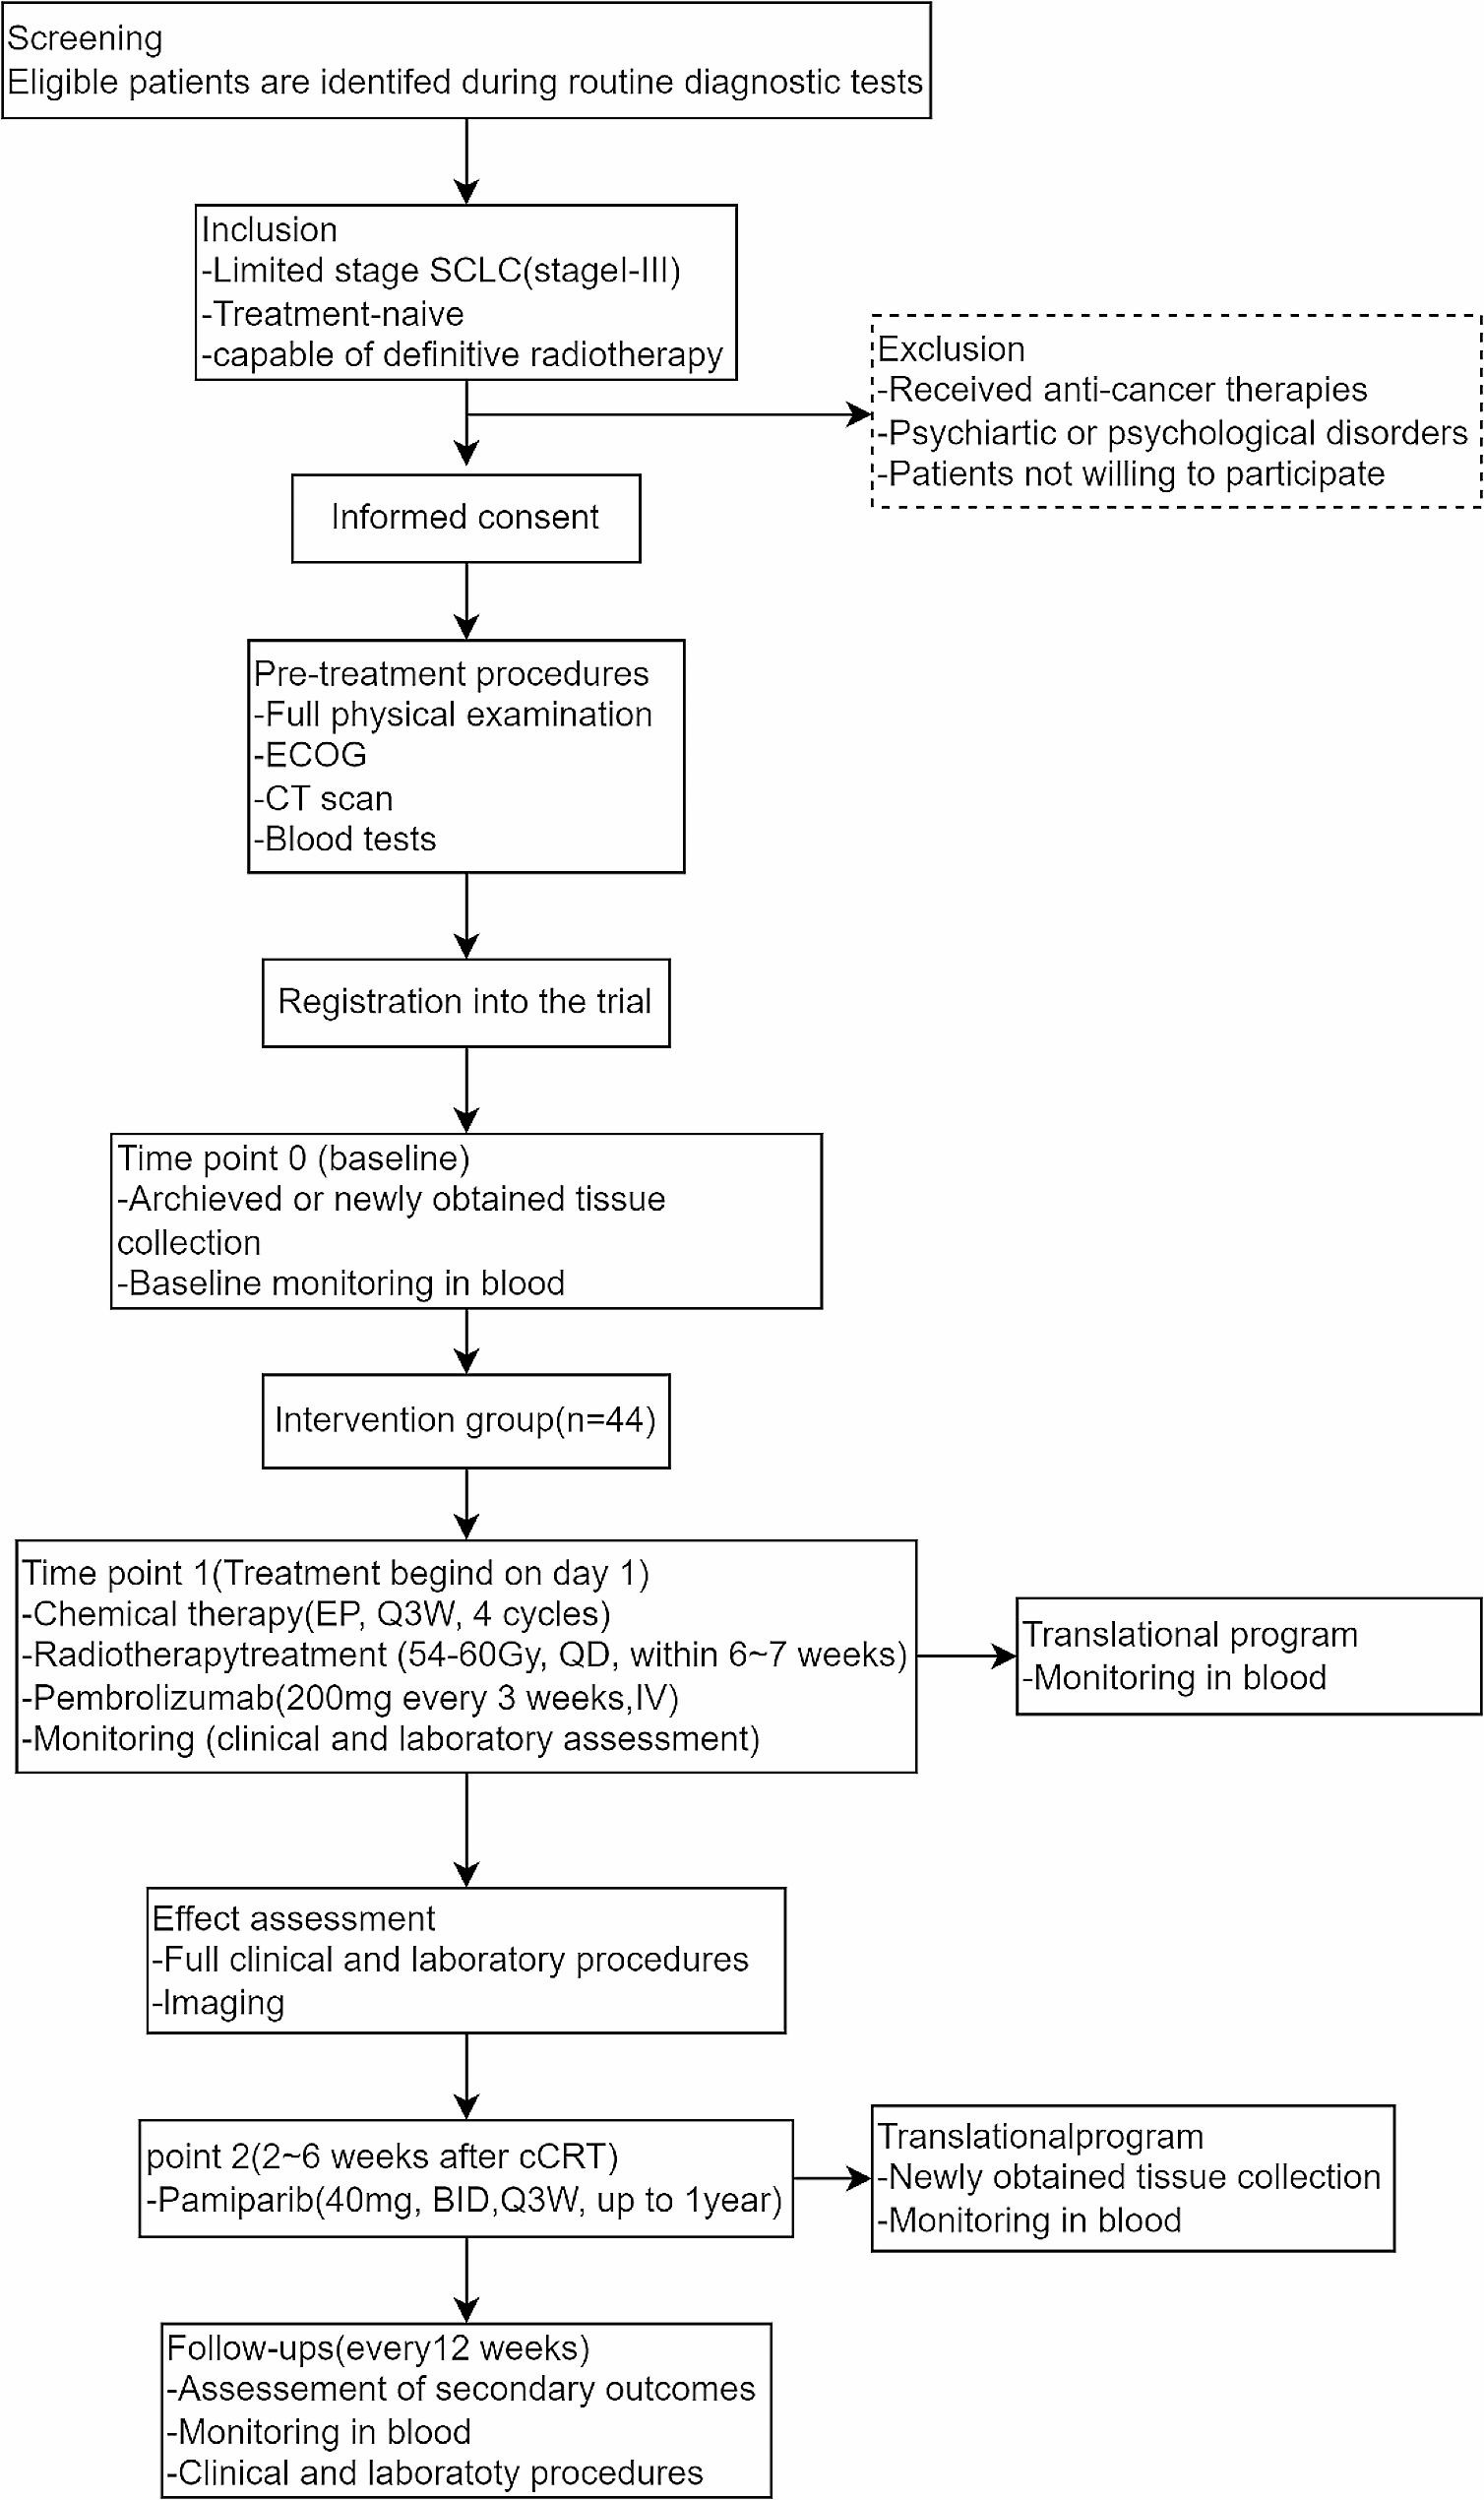 Pamiparib as consolidation treatment after concurrent chemoradiotherapy of limited-stage small cell lung cancer: a single-arm, open-label phase 2 trial